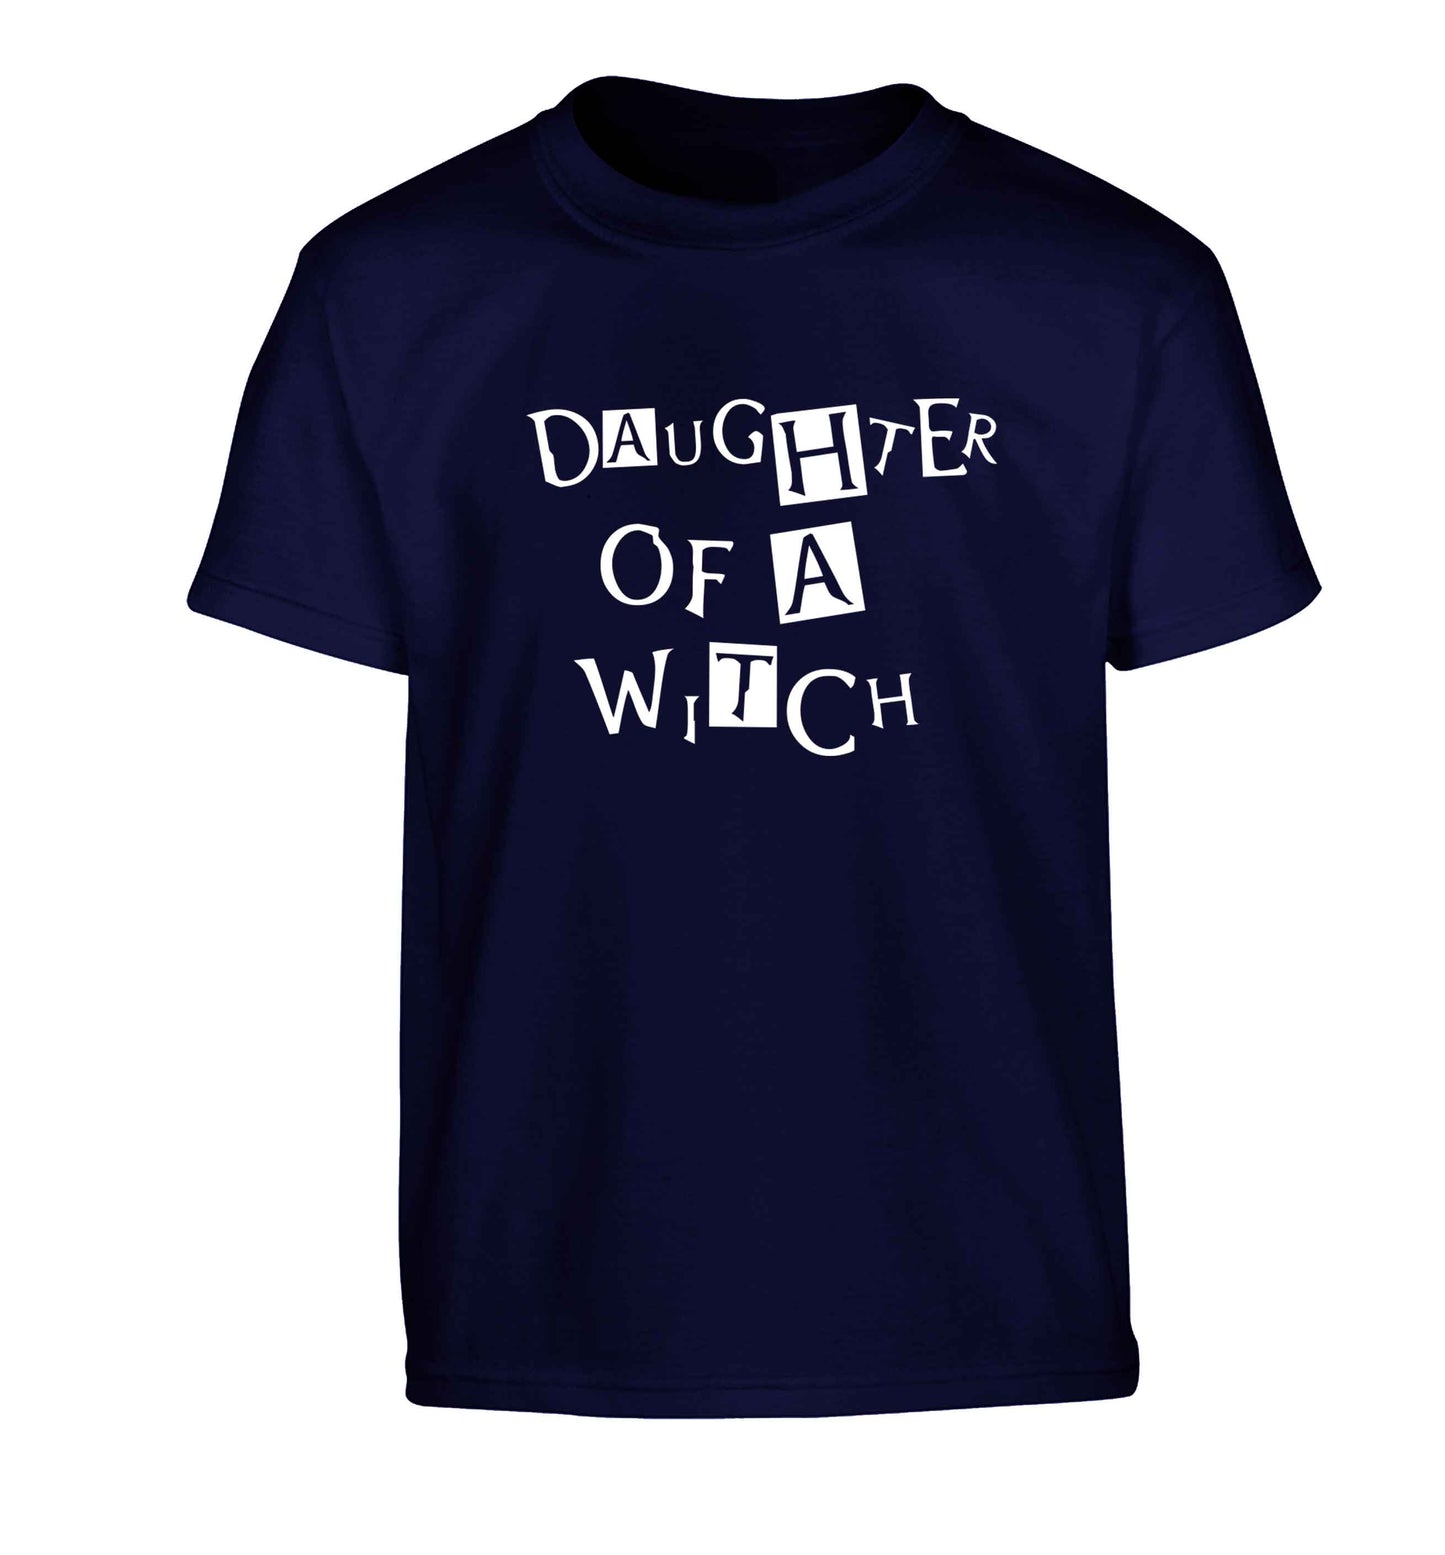 Daughter of a witch Children's navy Tshirt 12-13 Years